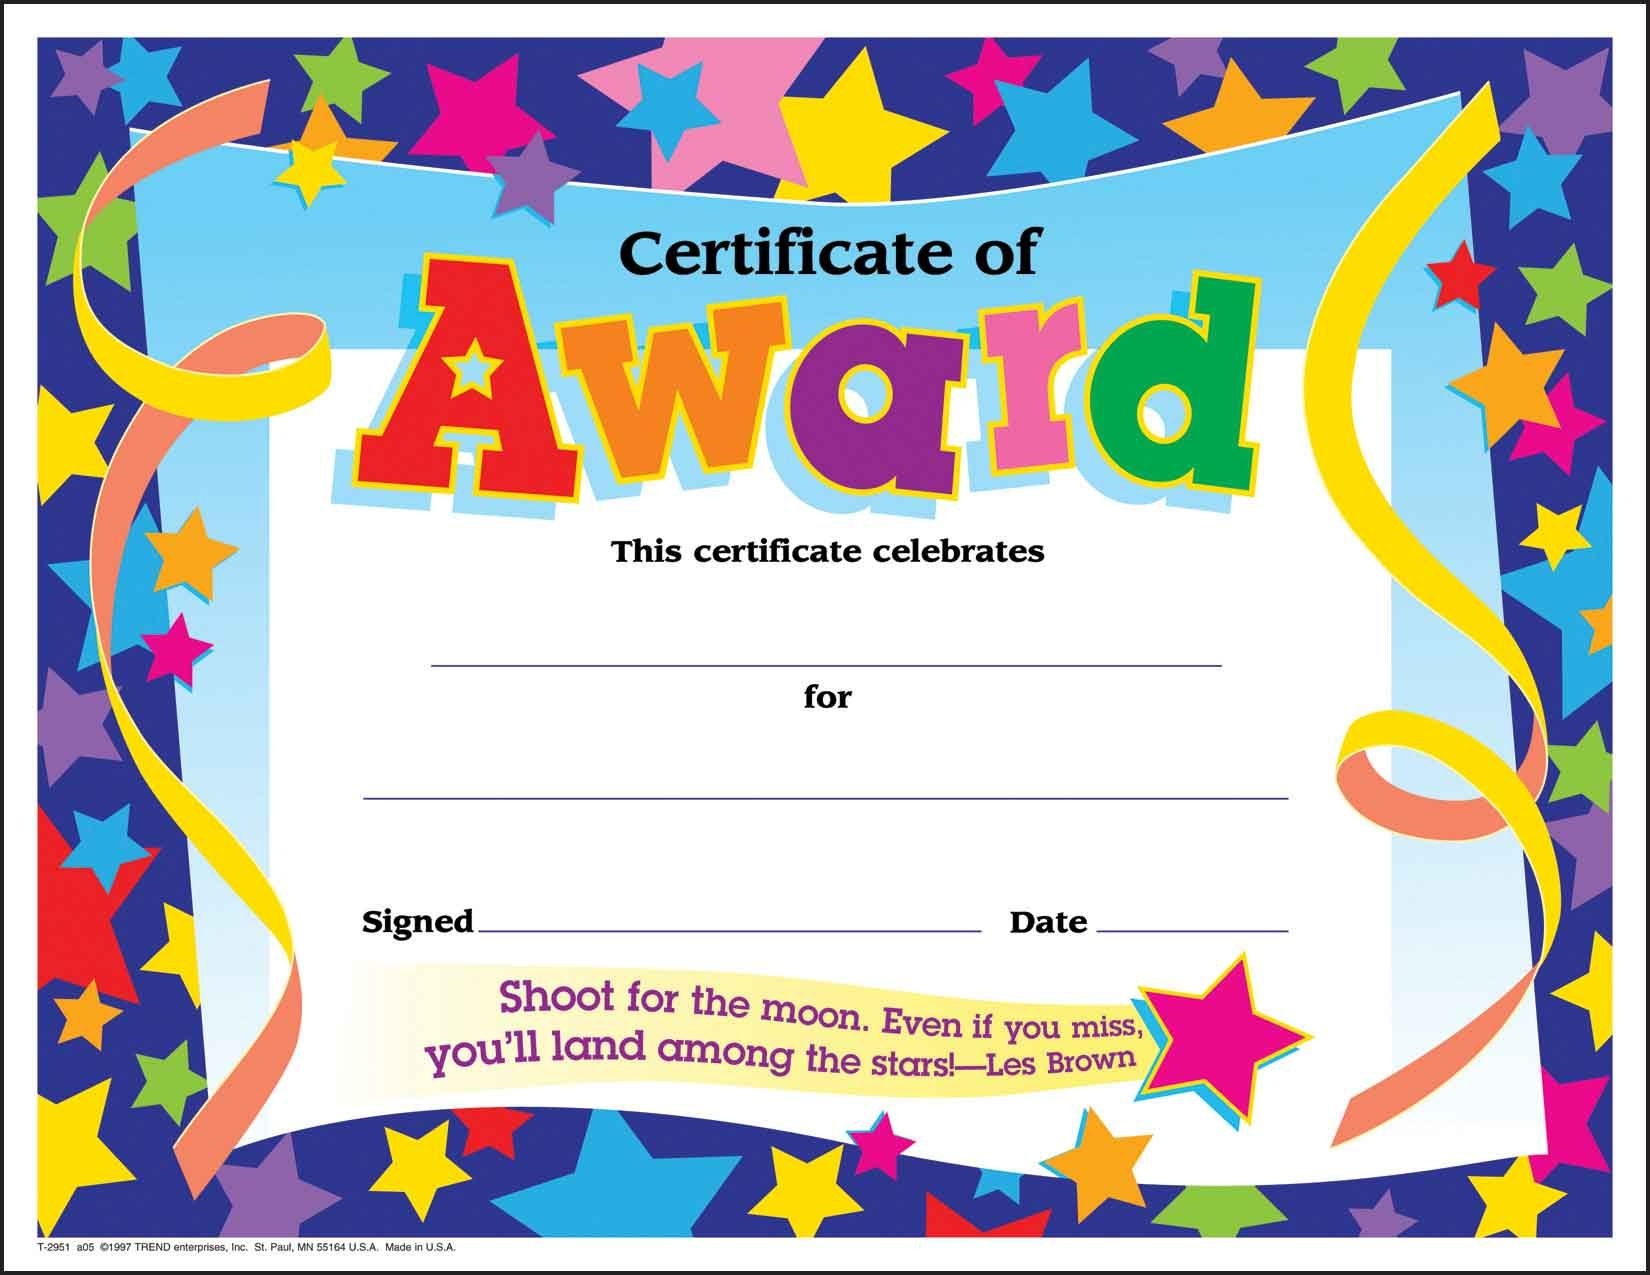 Certificate Template For Kids Free Certificate Templates - Free Printable Reward Certificates